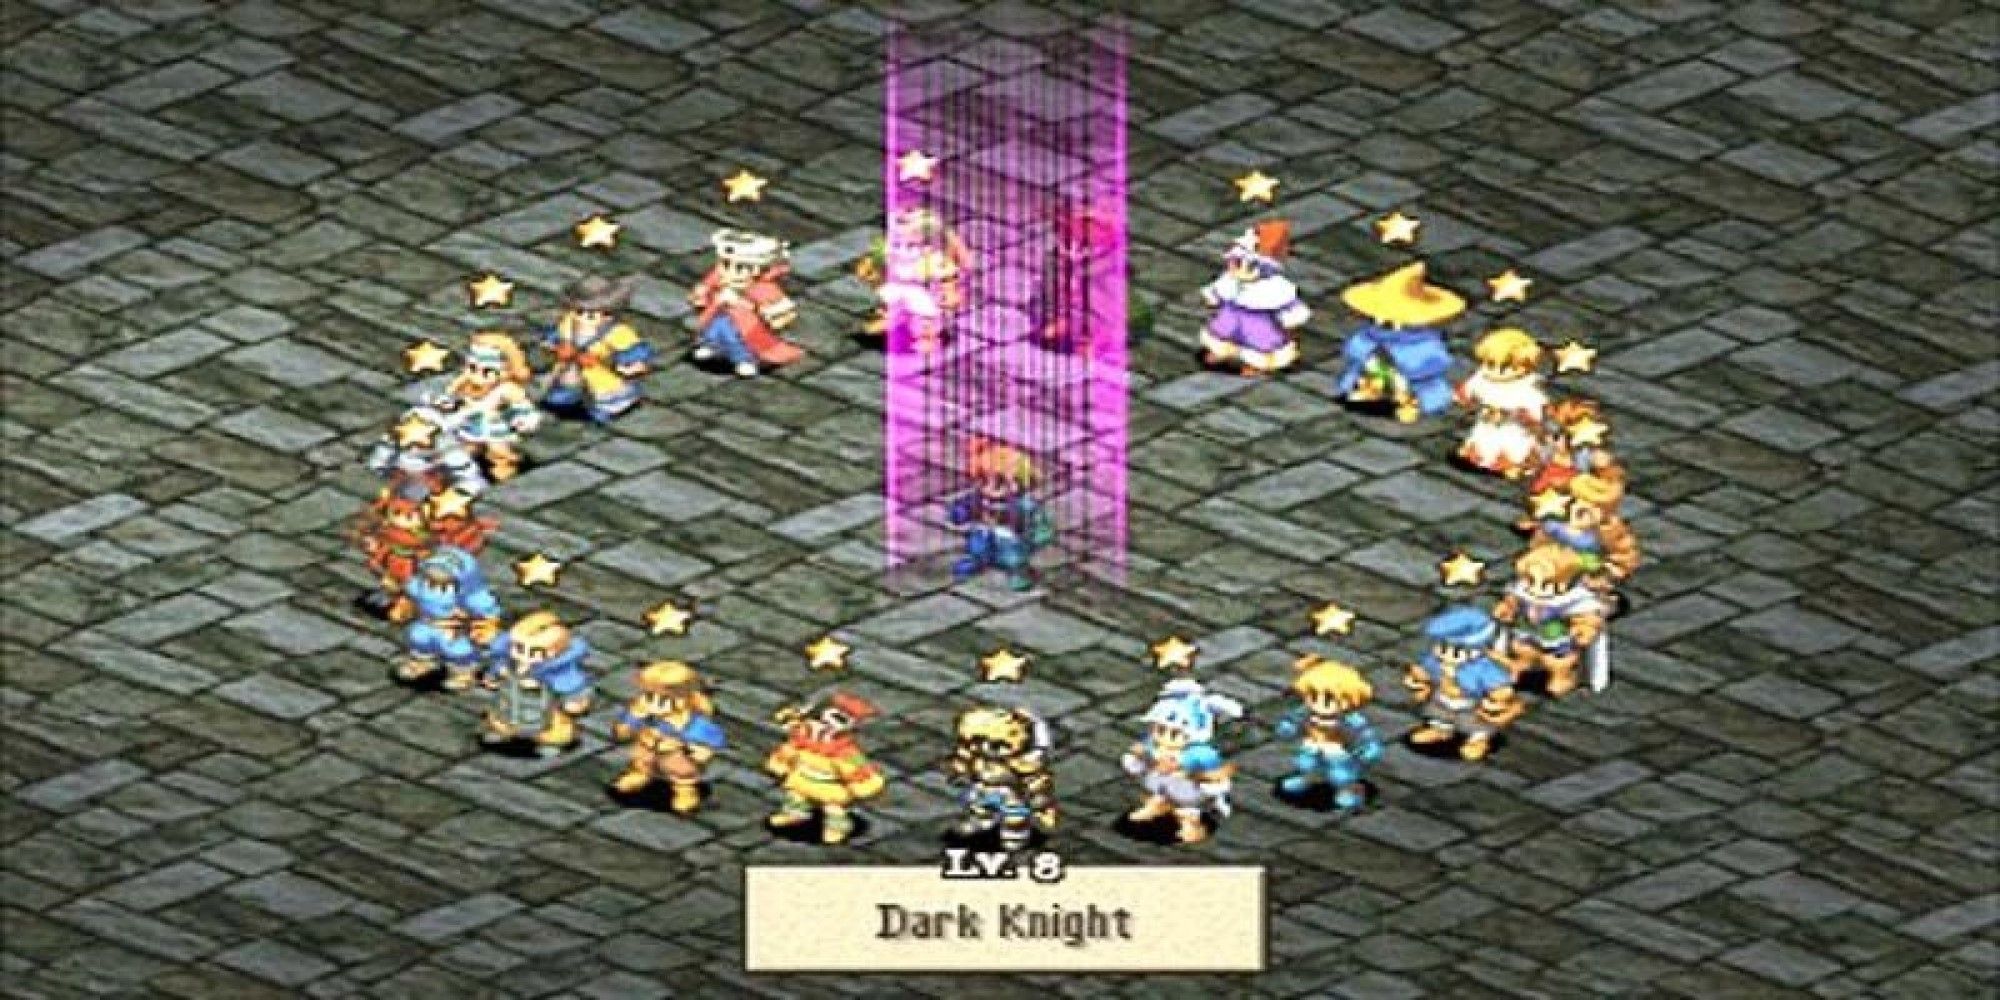 Gameplay from Final Fantasy Tactics